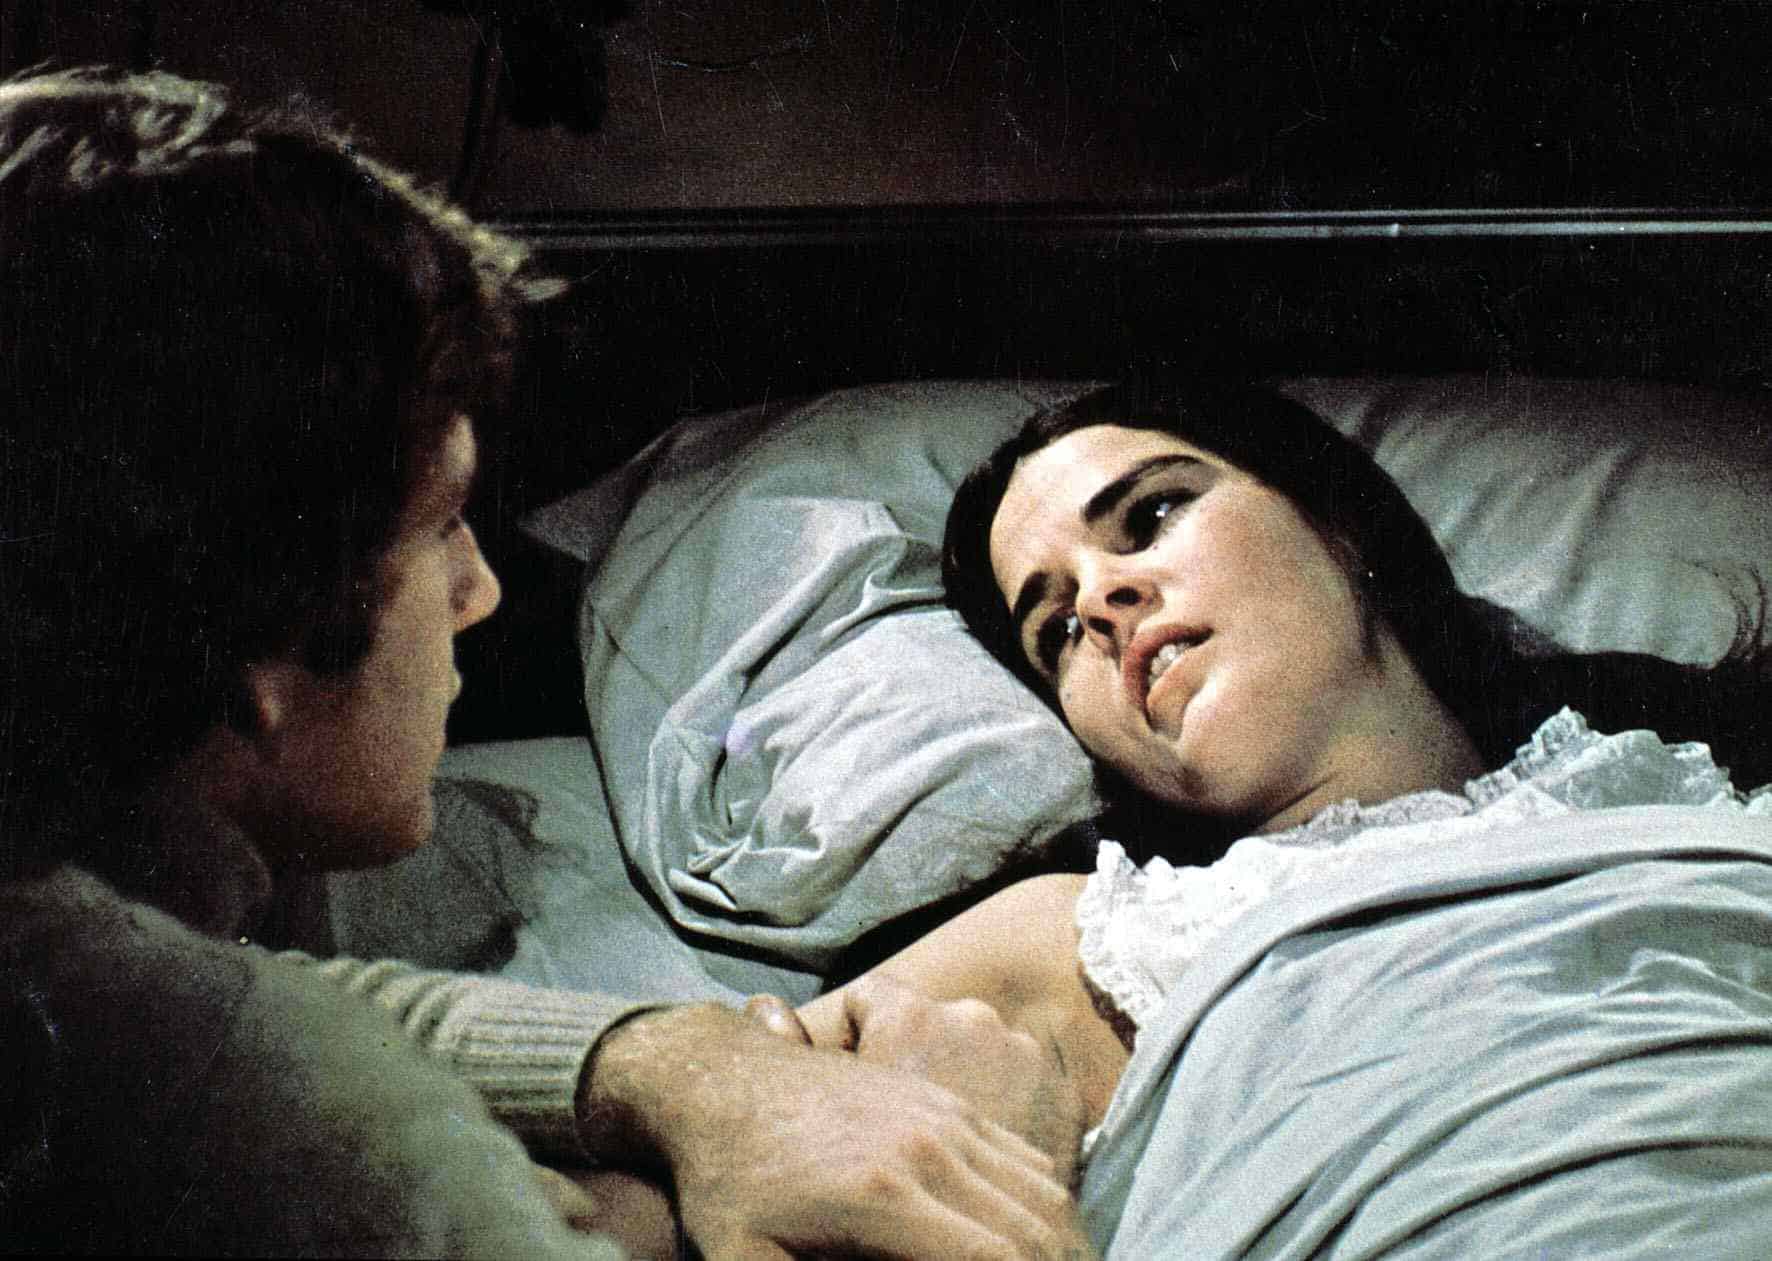 Ryan O'Neal and Ali MacGraw in this image from fuboTV